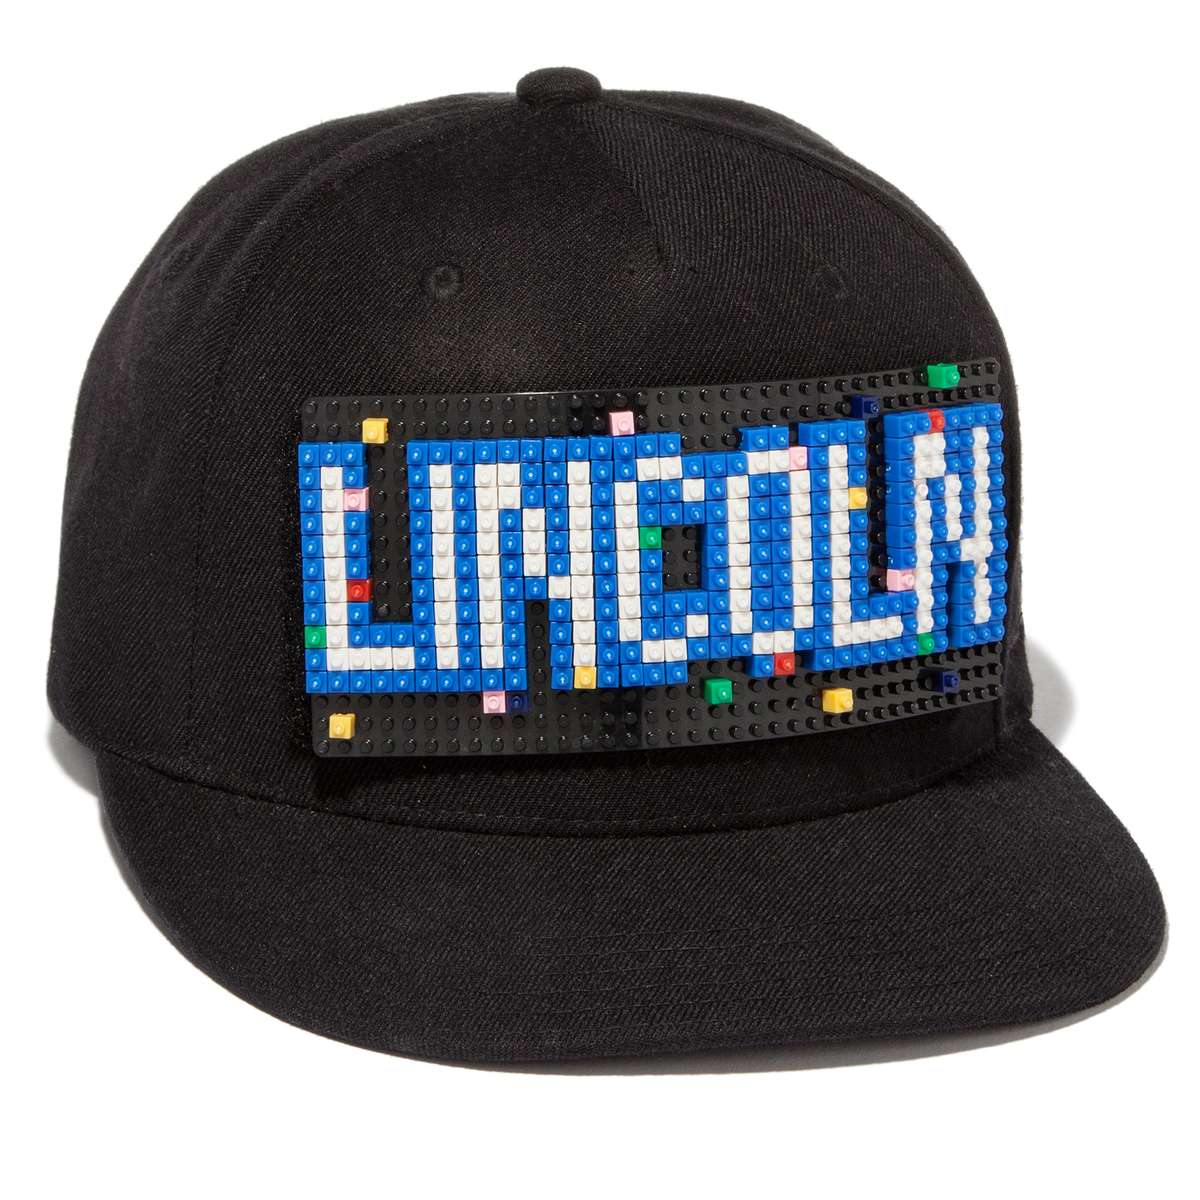 A Customizable Hat for Ilana